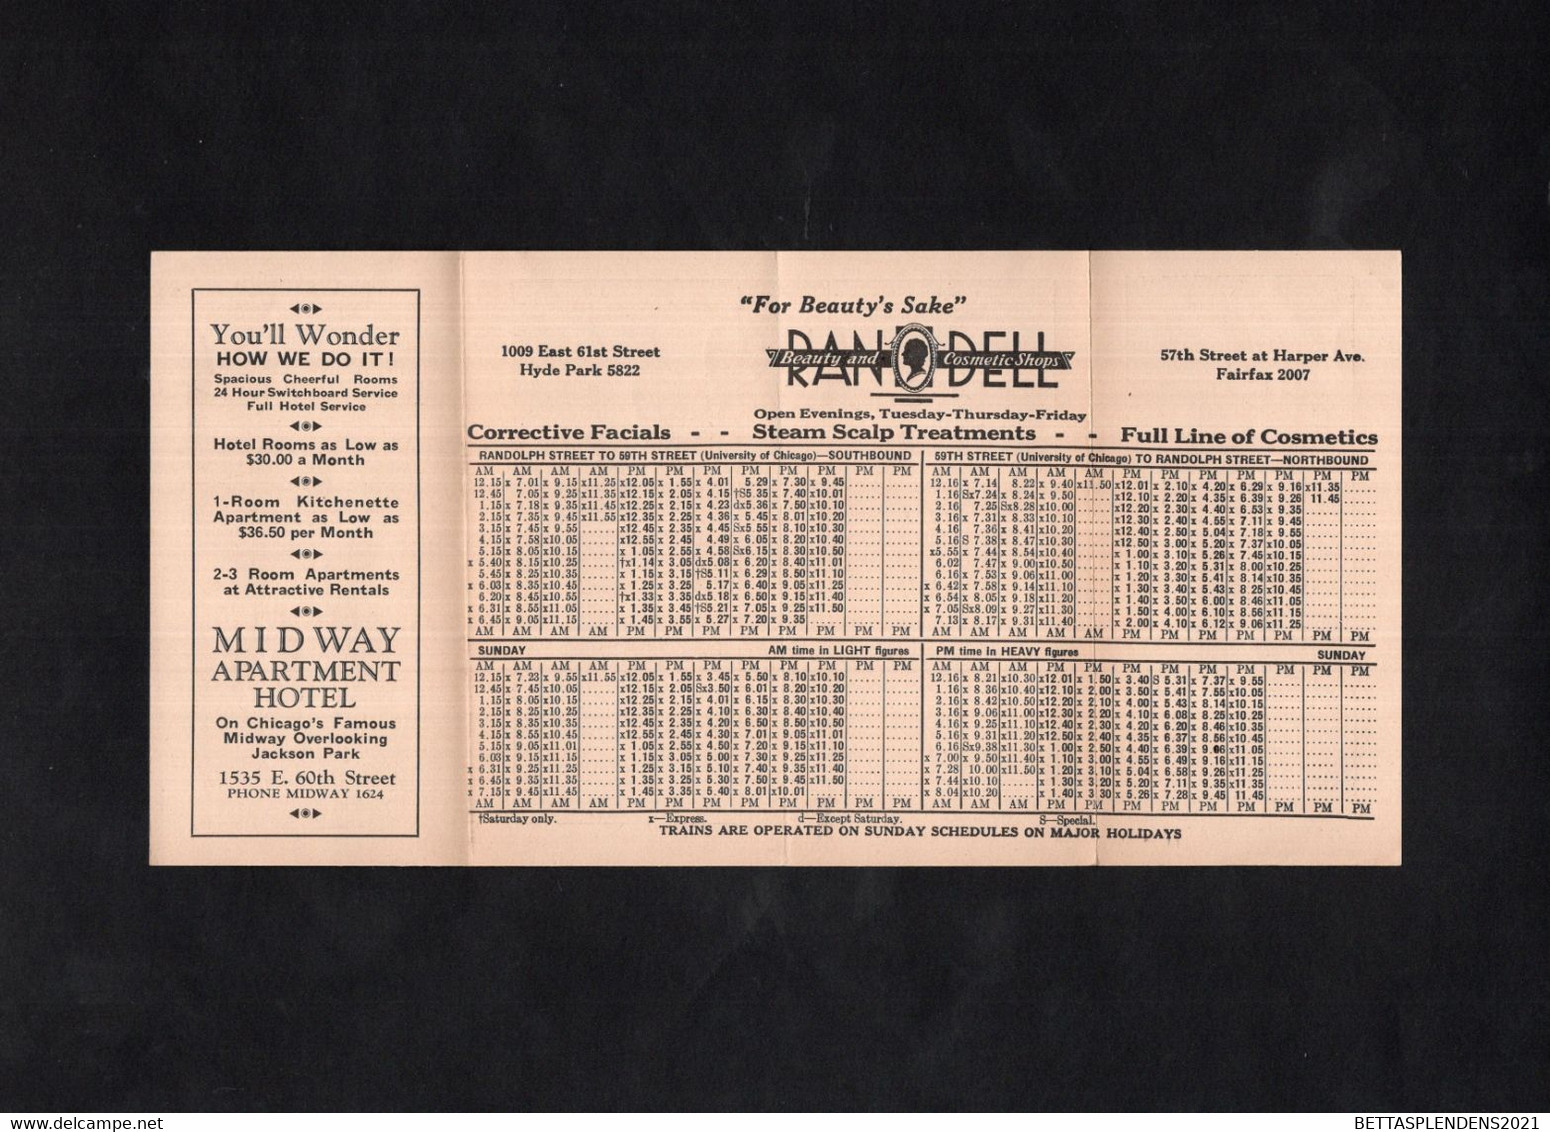 59th Street (University Of Chicago) - ILLINOIS CENTRAL - Suburban Time Table  - April 1935 - World